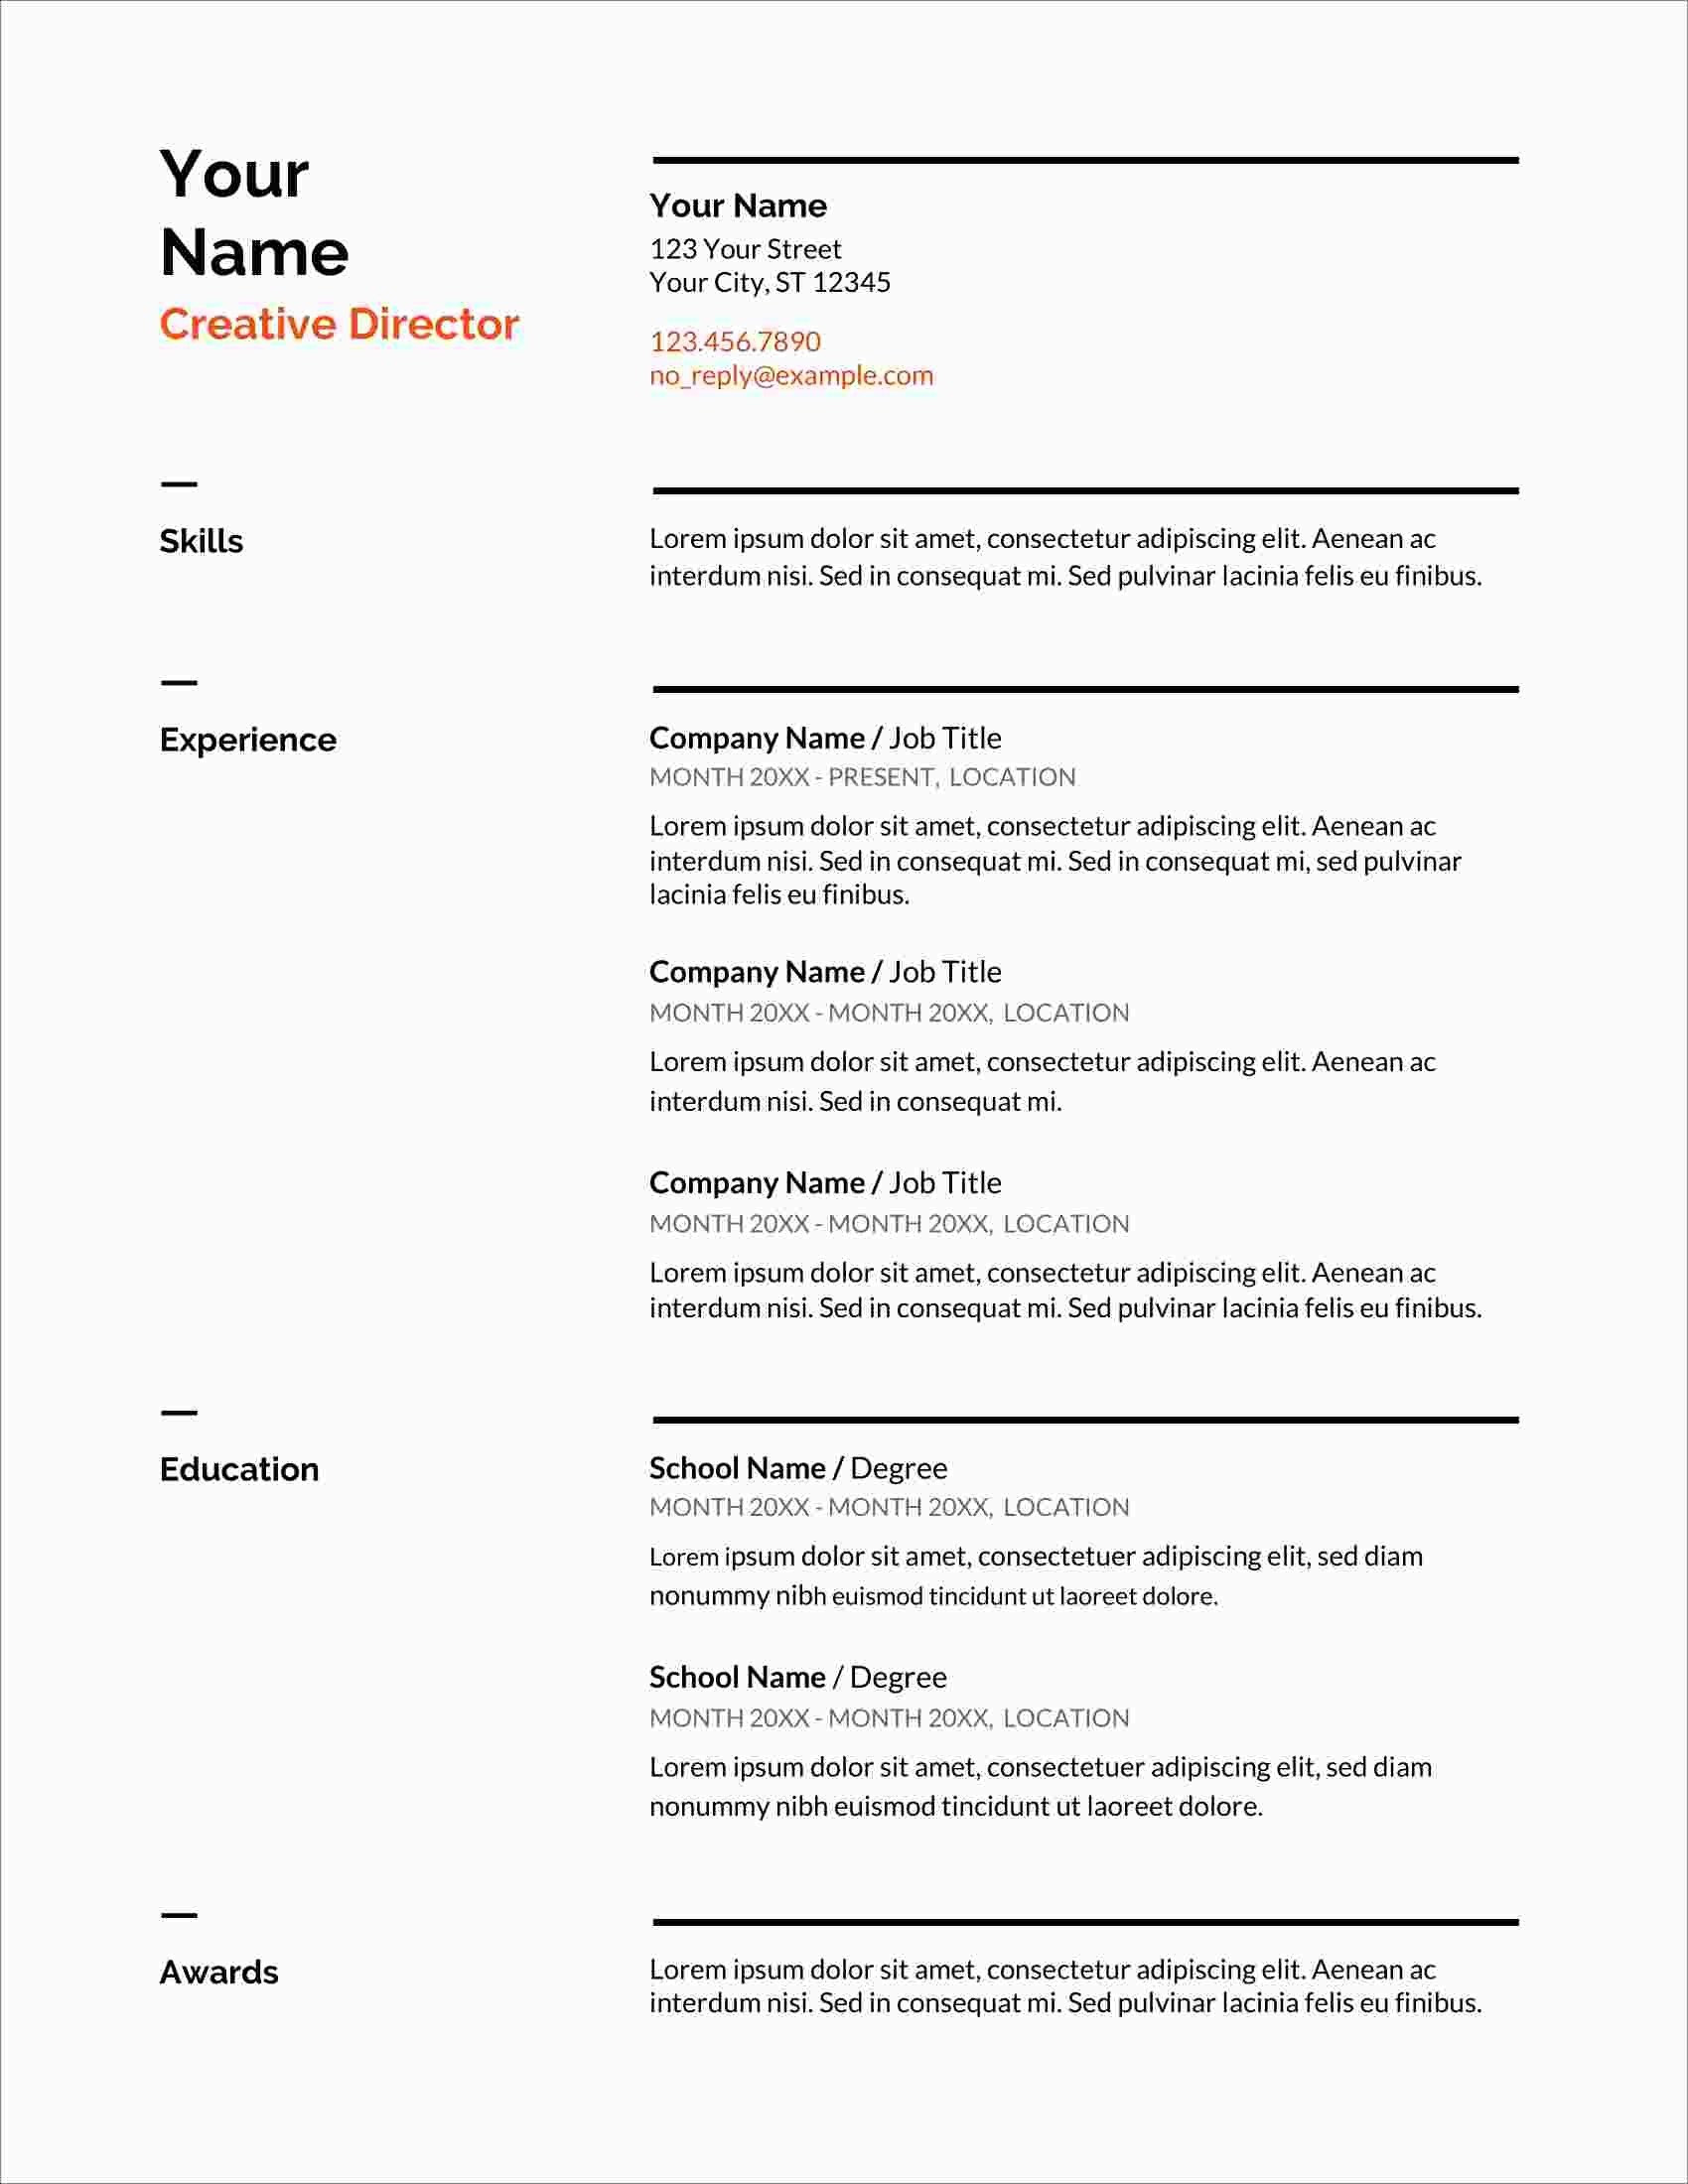 Sample Resume for Freshers with Photo attached 20 Free Resume Templates to Download (word, Pdf & More)